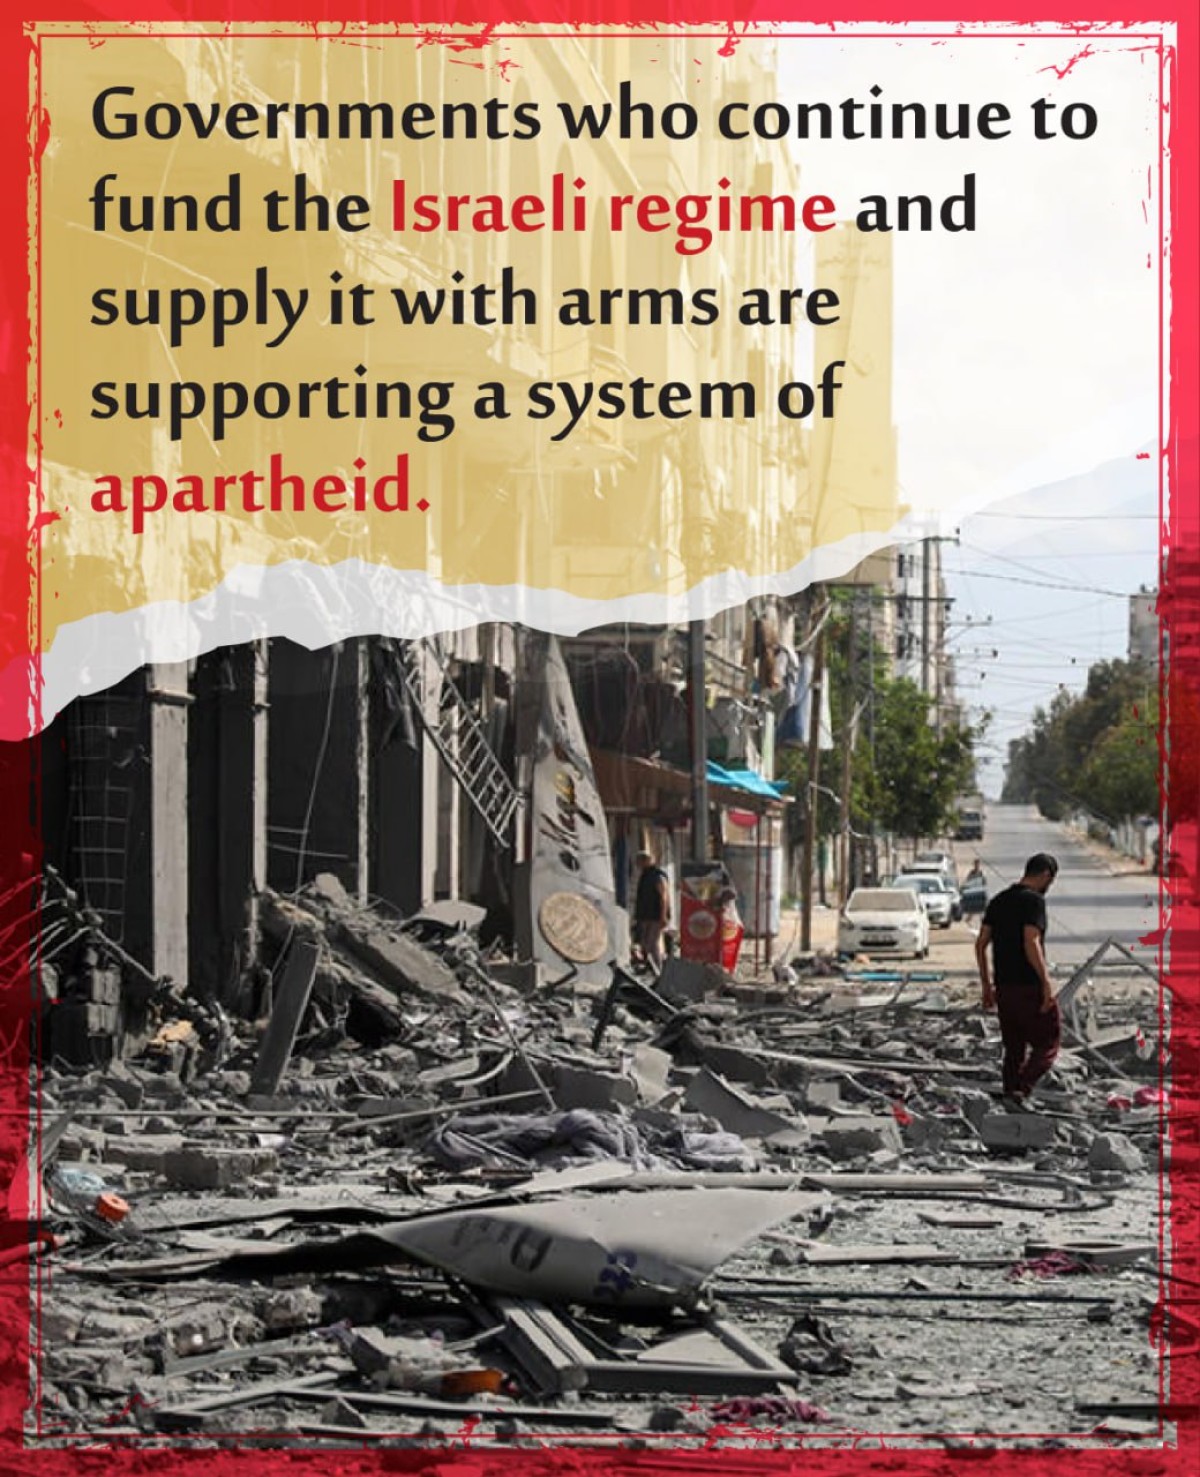 Governments who continue to fund the Israeli regime and supply it with arms are supporting a system of apartheid.